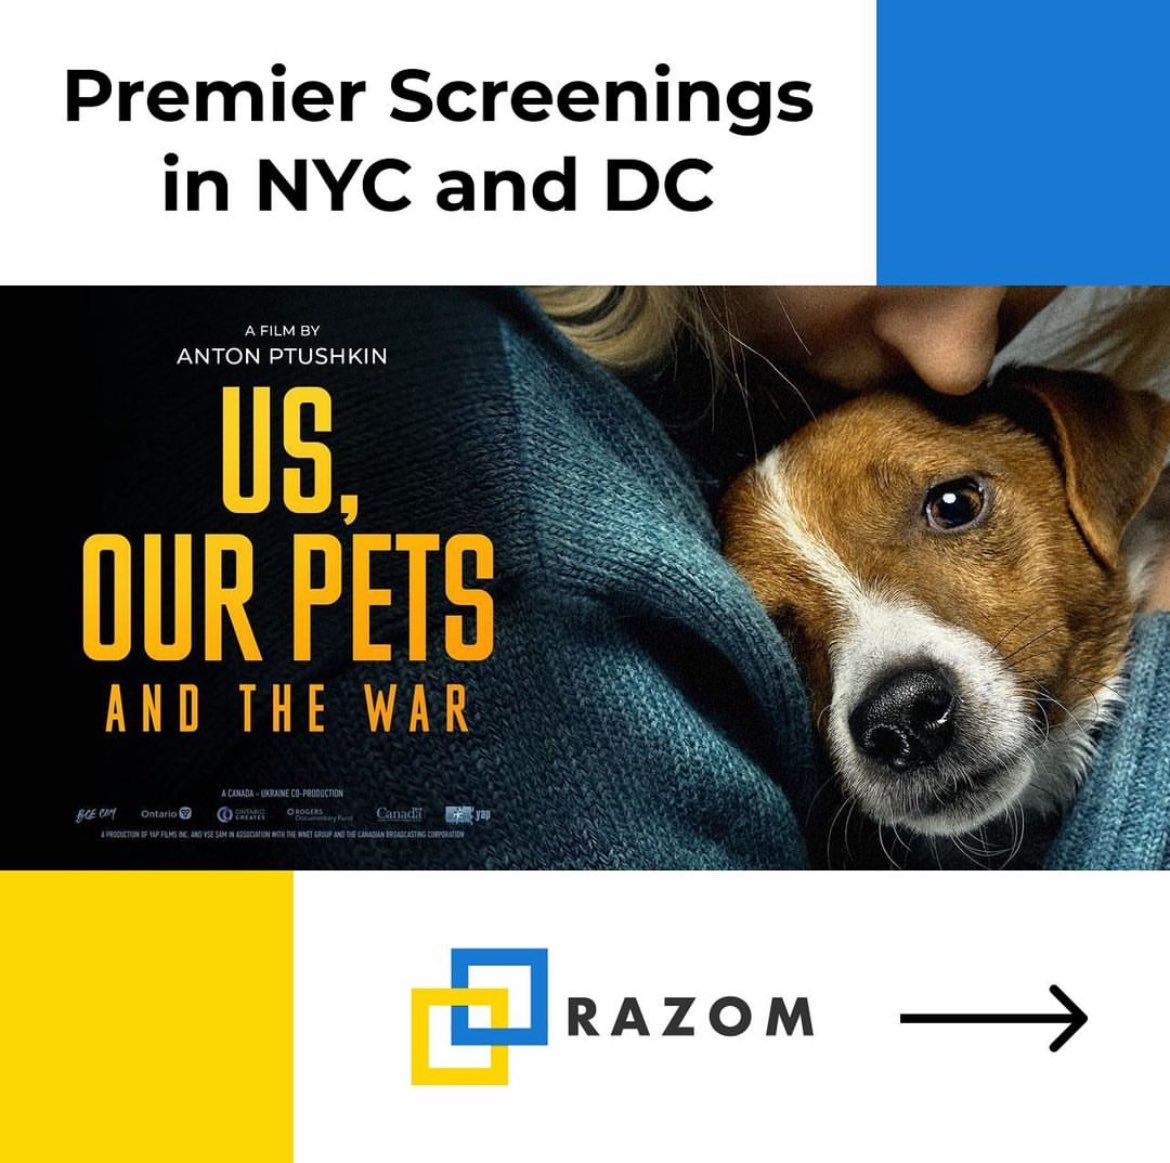 Really excited for another colab @ptuxerman x @razomforukraine NYC Screening: May 16, 6:30 p.m. ￼Location: Village East, Theater 1 Tickets: bit.ly/Razom-Ptushkin… DC Screening: May 20, 6:30 p.m. Location: Landmark's E Street Cinema Tickets: bit.ly/Razom-Ptushkin…